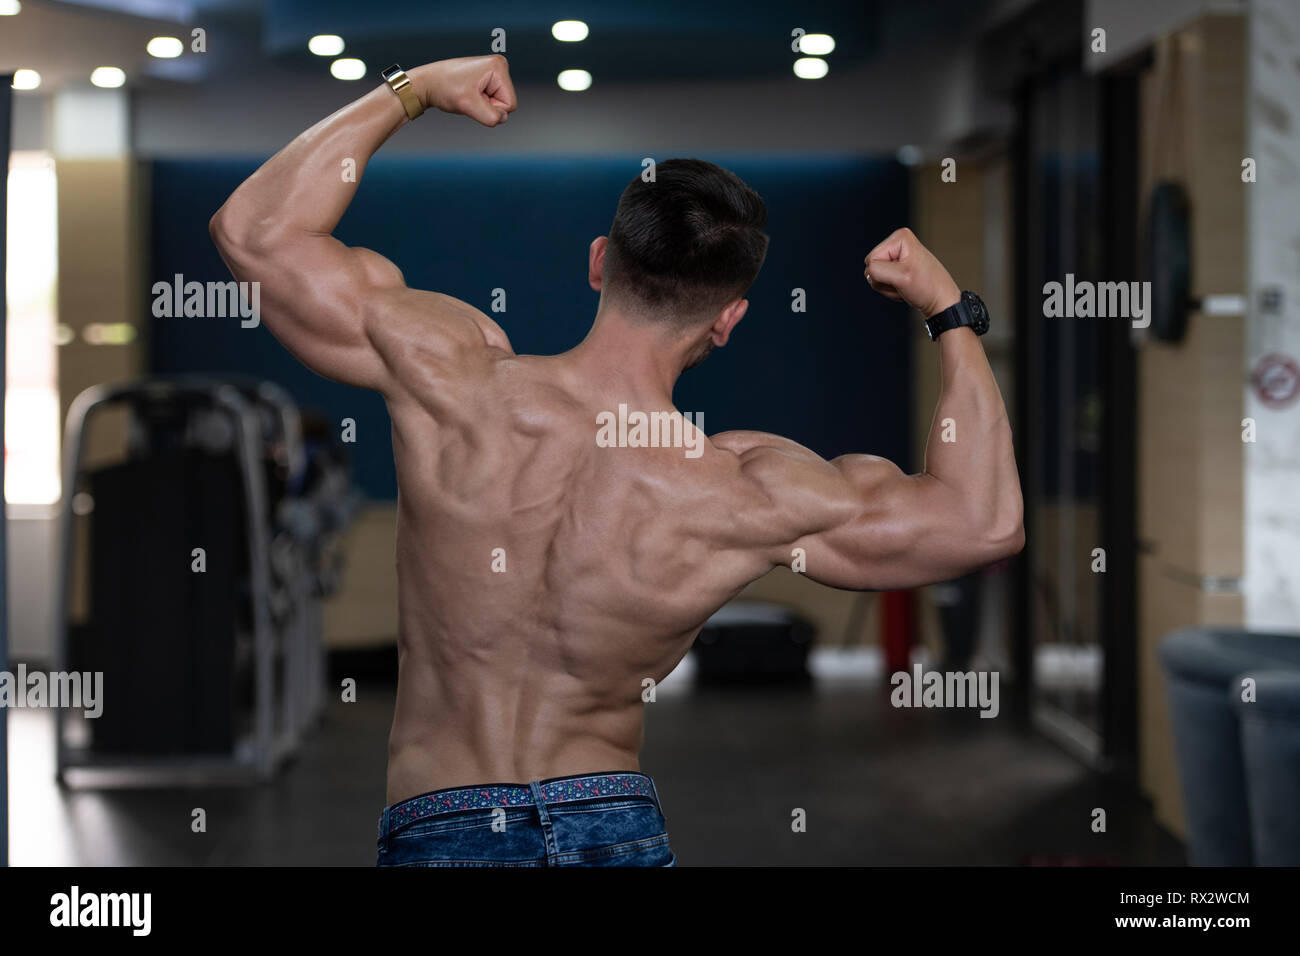 Handsome Young Man In Jeans Standing Strong In The Gym And Flexing Muscles - Muscular Athletic Bodybuilder Fitness Model Posing After Exercises Stock Photo